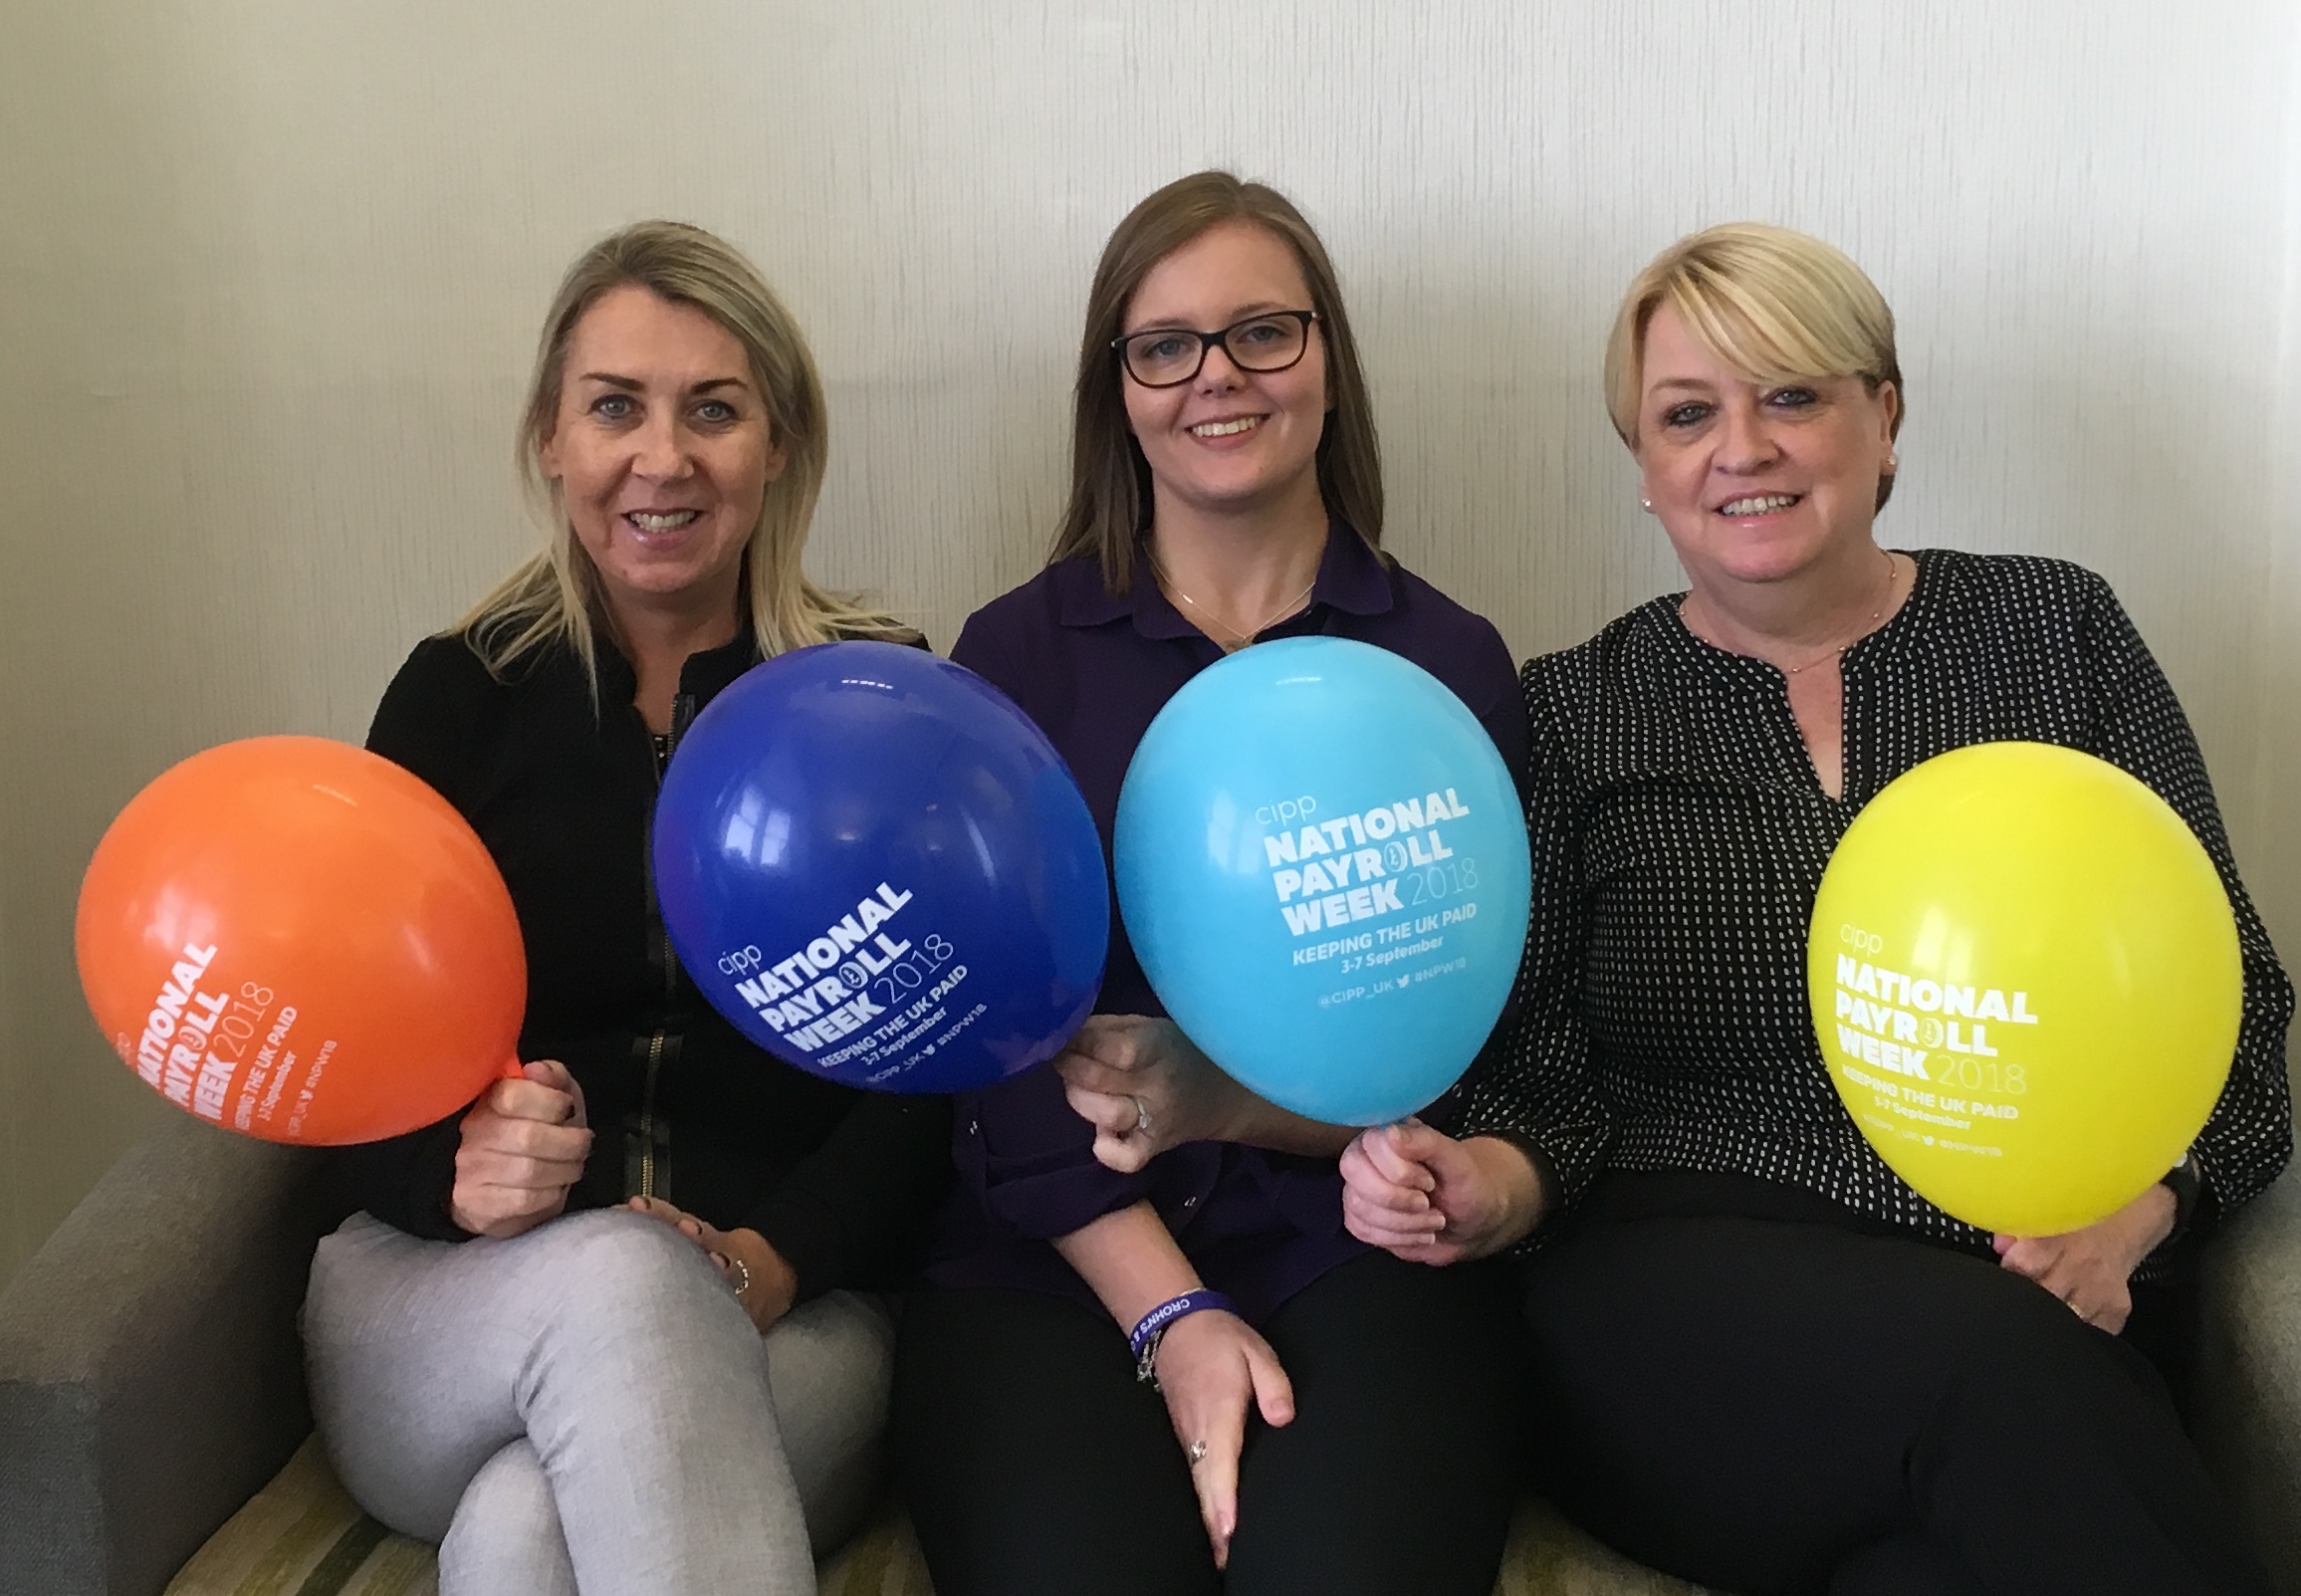 CavanaghKelly Dugannon based Payroll Services team supporting national payroll week - pictured in cavanaghkelly reception area with #NPW18 coloured balloons